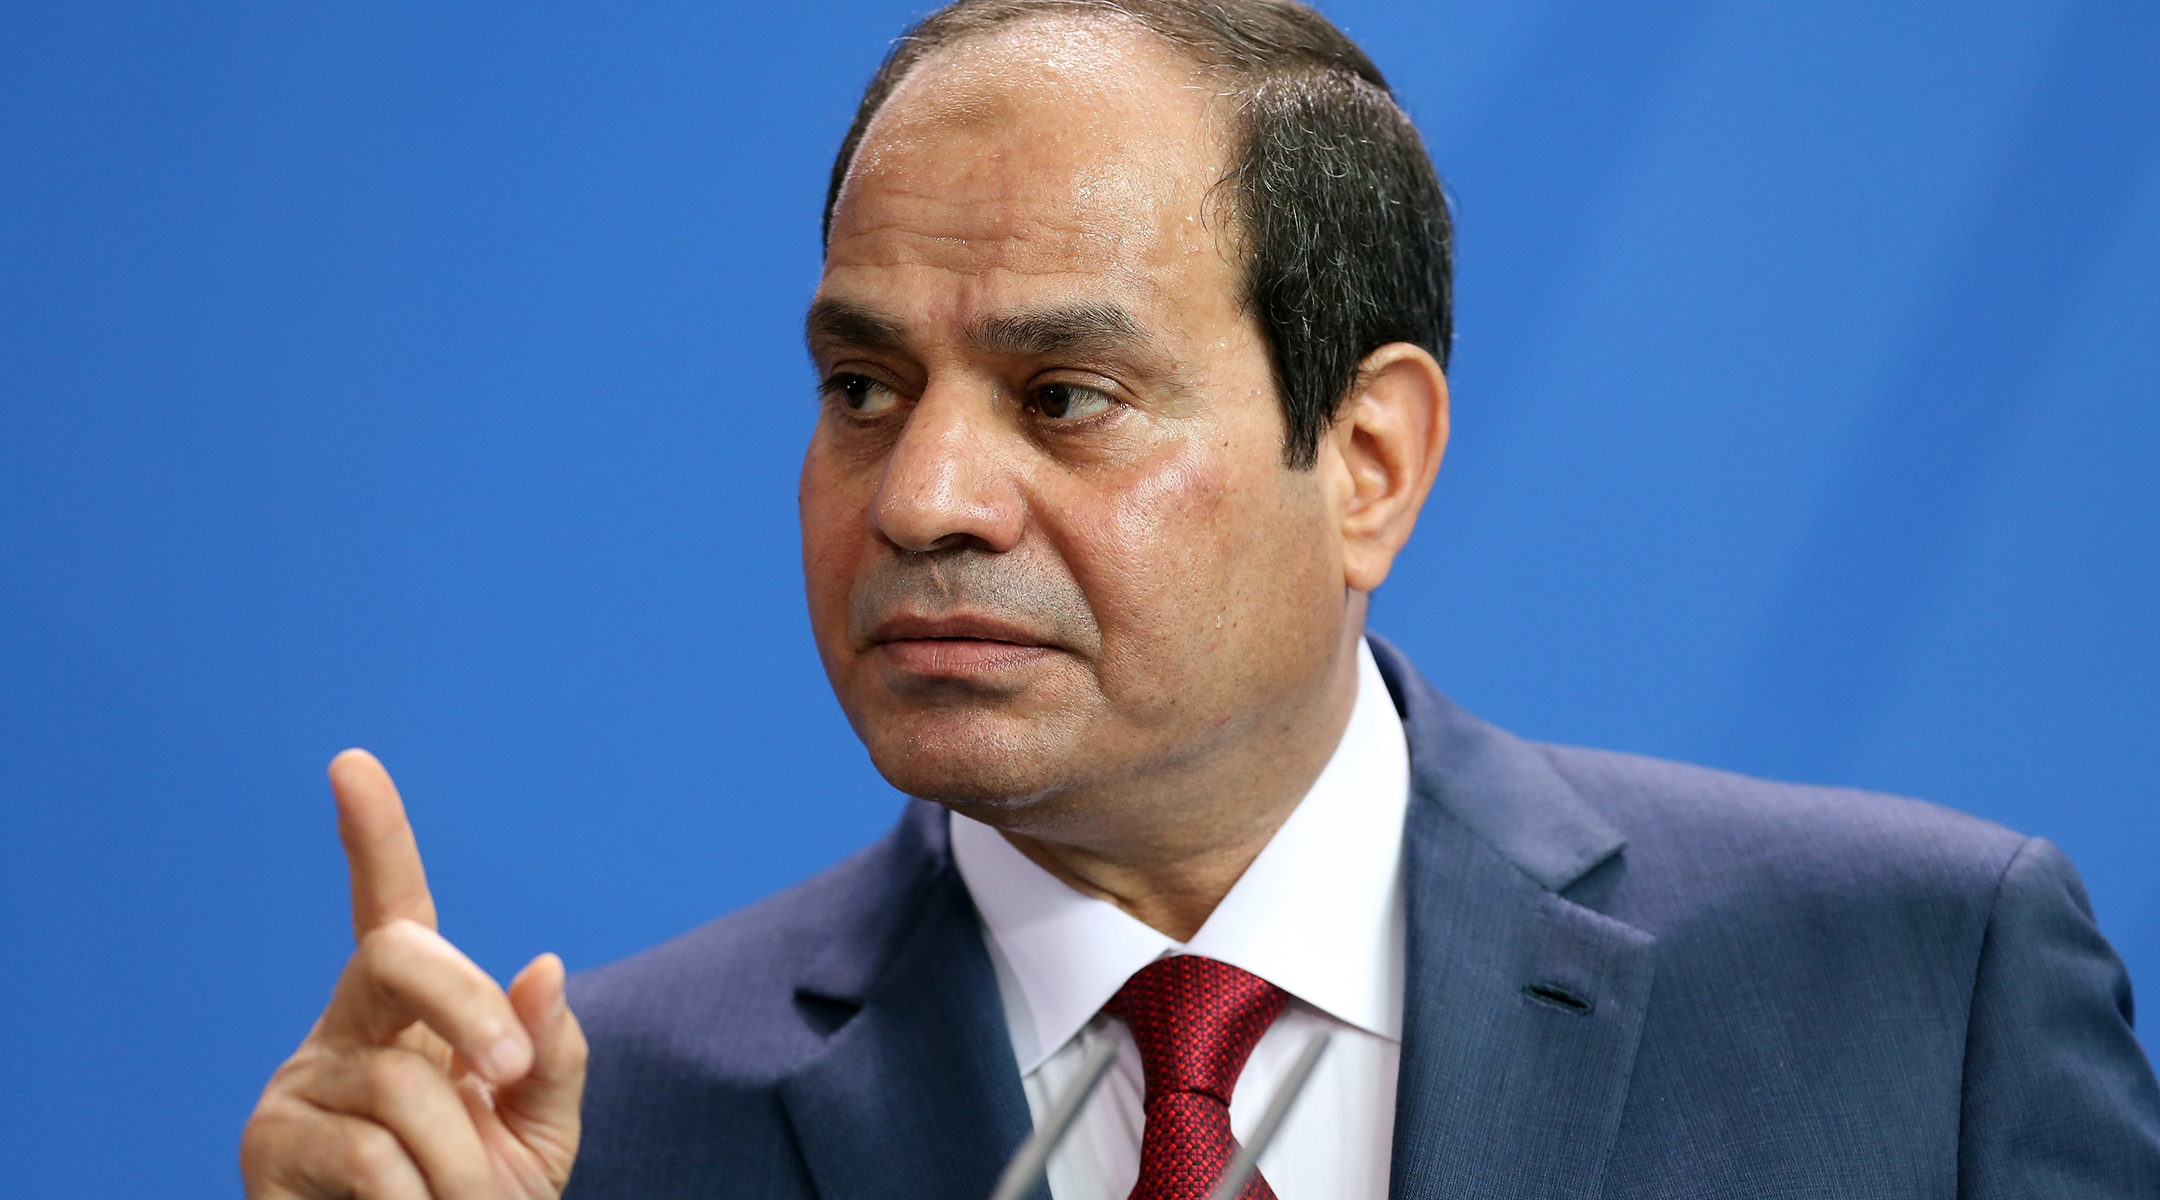 Egyptian President Abdel Fattah el-Sissi speaking during a news conference with German Chancellor Angela Merkel (unseen) in Berlin, Germany, June 3, 2015. (Adam Berry/Getty Images)